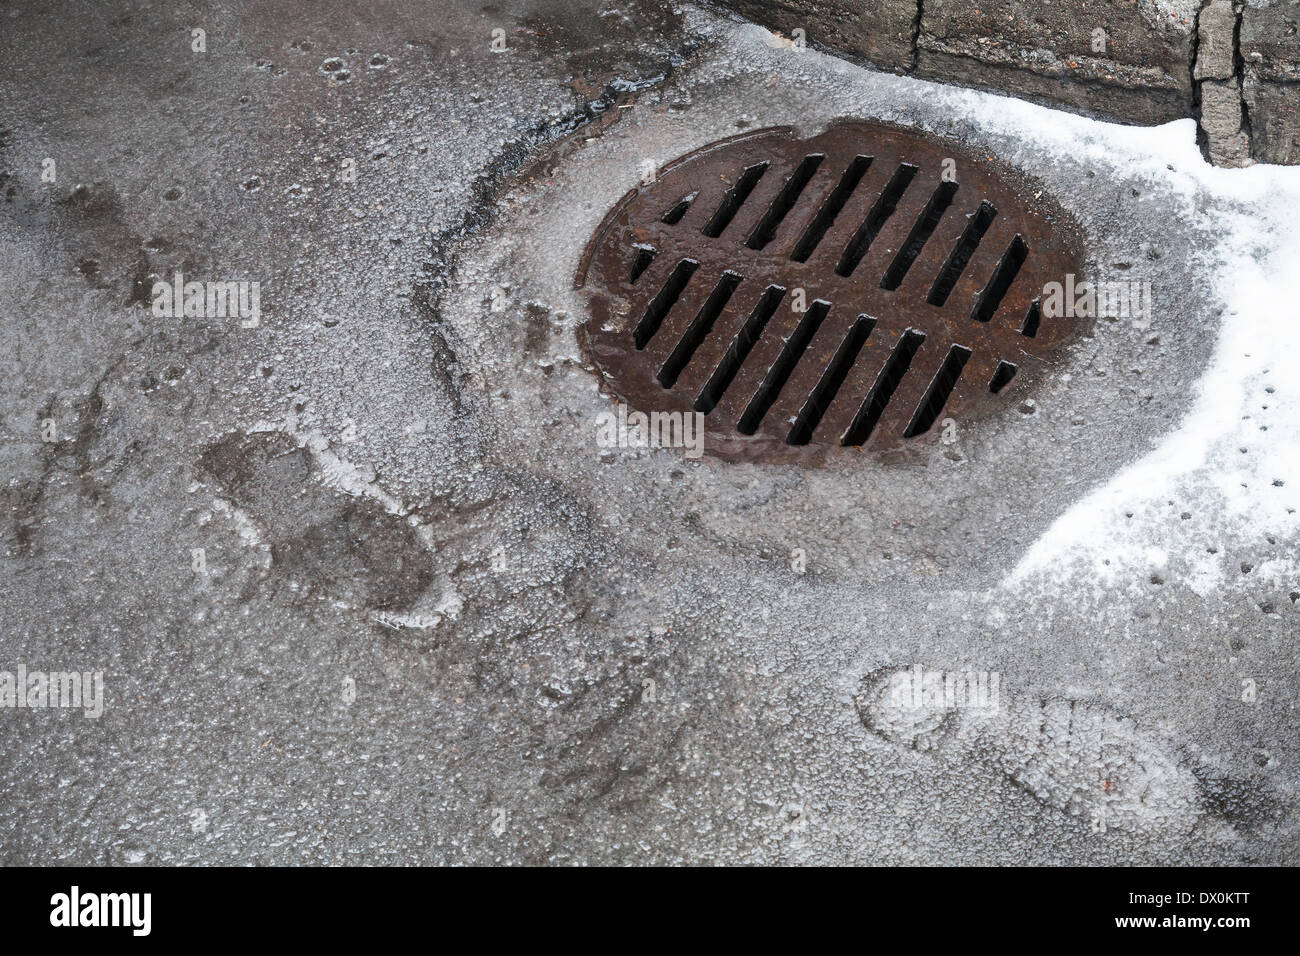 Sewer manhole on the urban asphalt road with wet snow Stock Photo